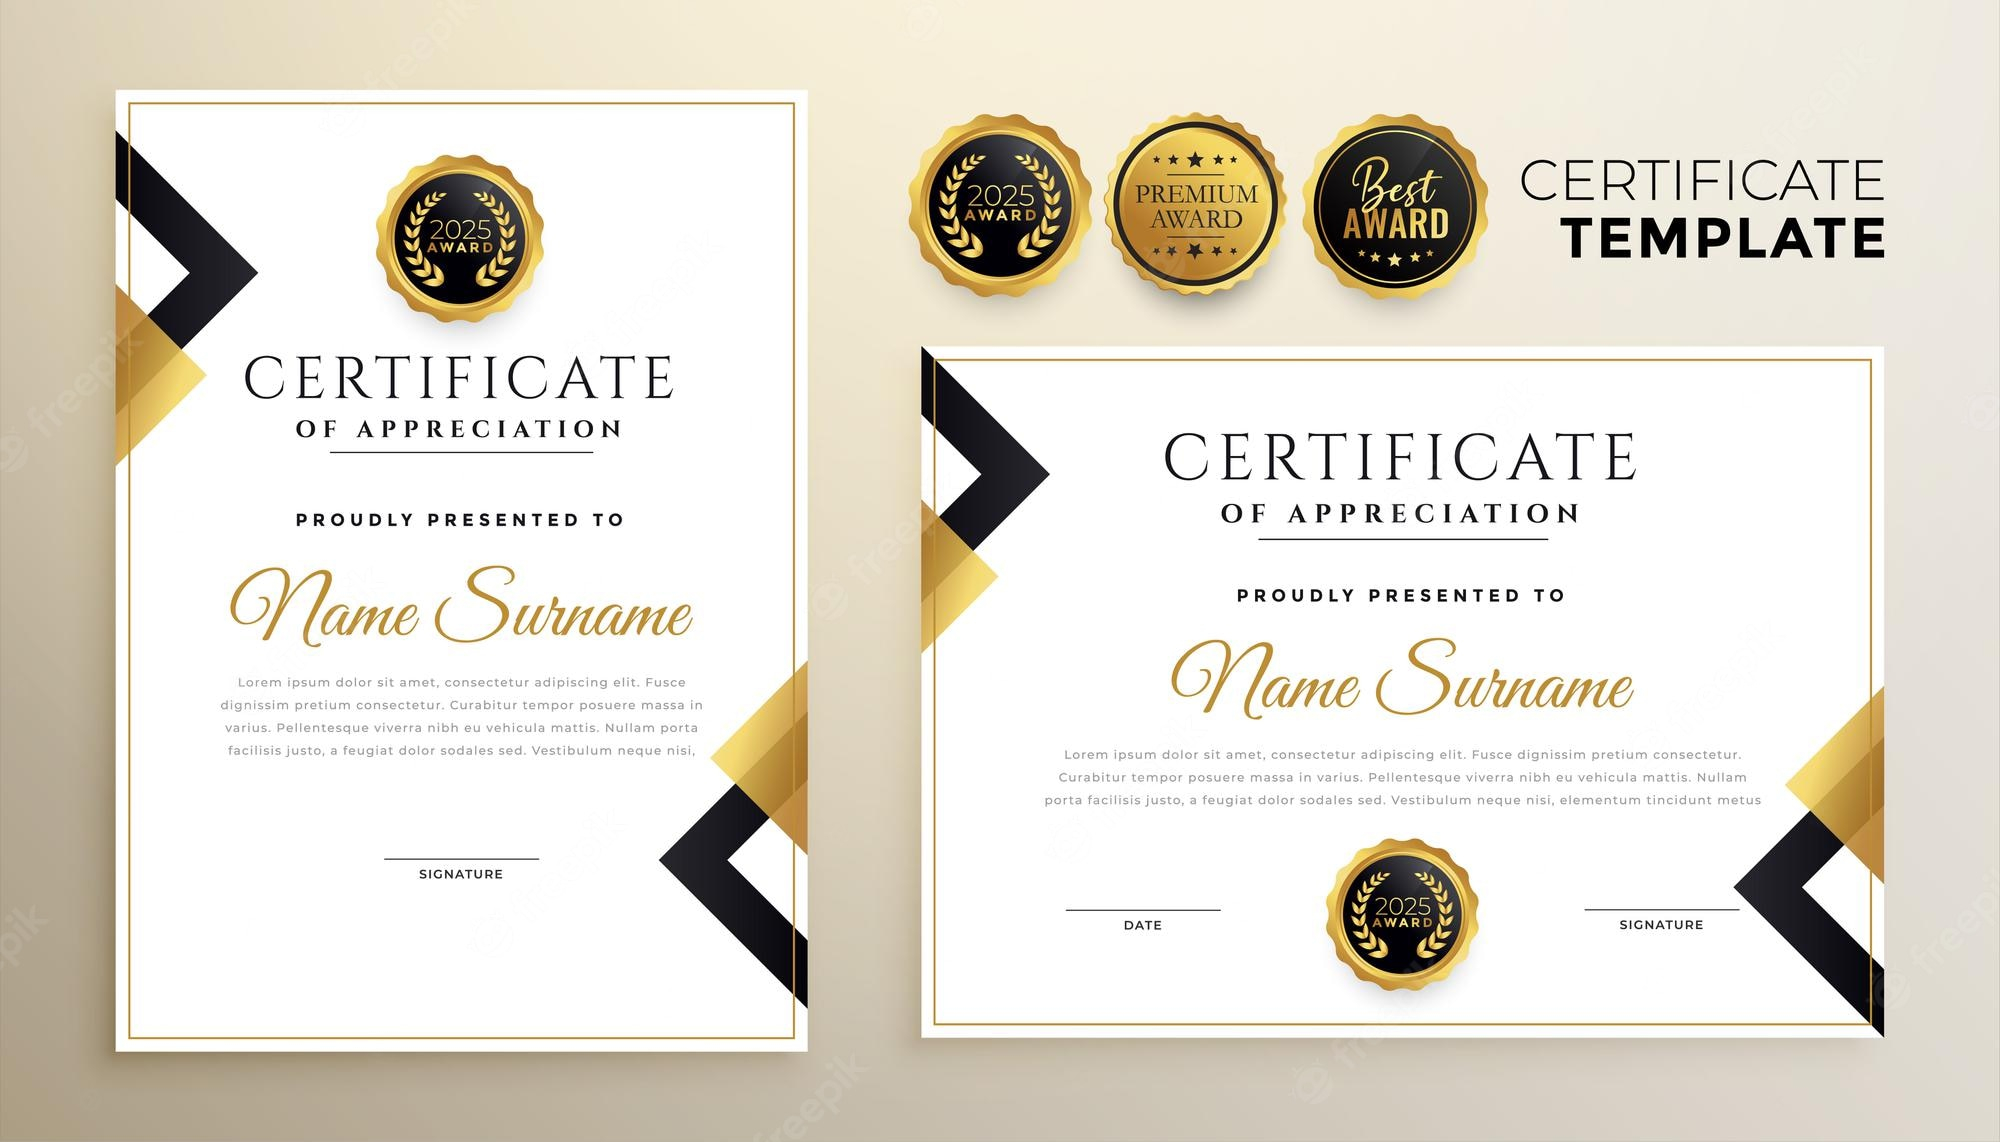 Certificate template Vectors & Illustrations for Free Download  In Free Certificate Templates For Word 2007